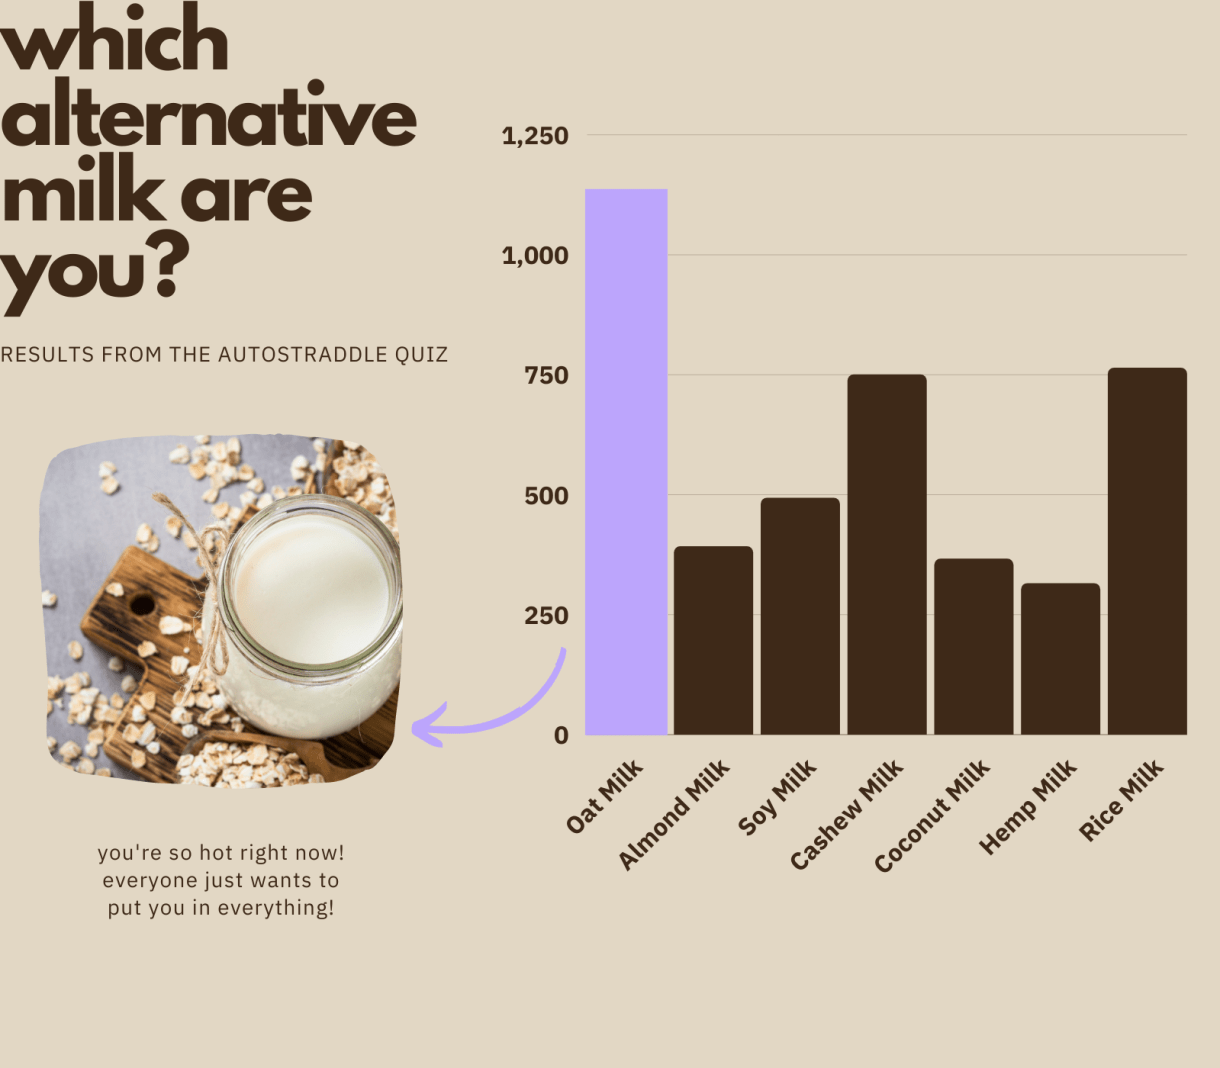 the results for which alternative non-dairy milk are you? 26% of you are oat milk, 18% rice milk, 17% cashew milk, 12% soy milk, 9% almond milk, 8% coconut milk, 7.5% hemp milk.  Some text reads: "you're so hot right now! everyone just wants to put you in everything!"